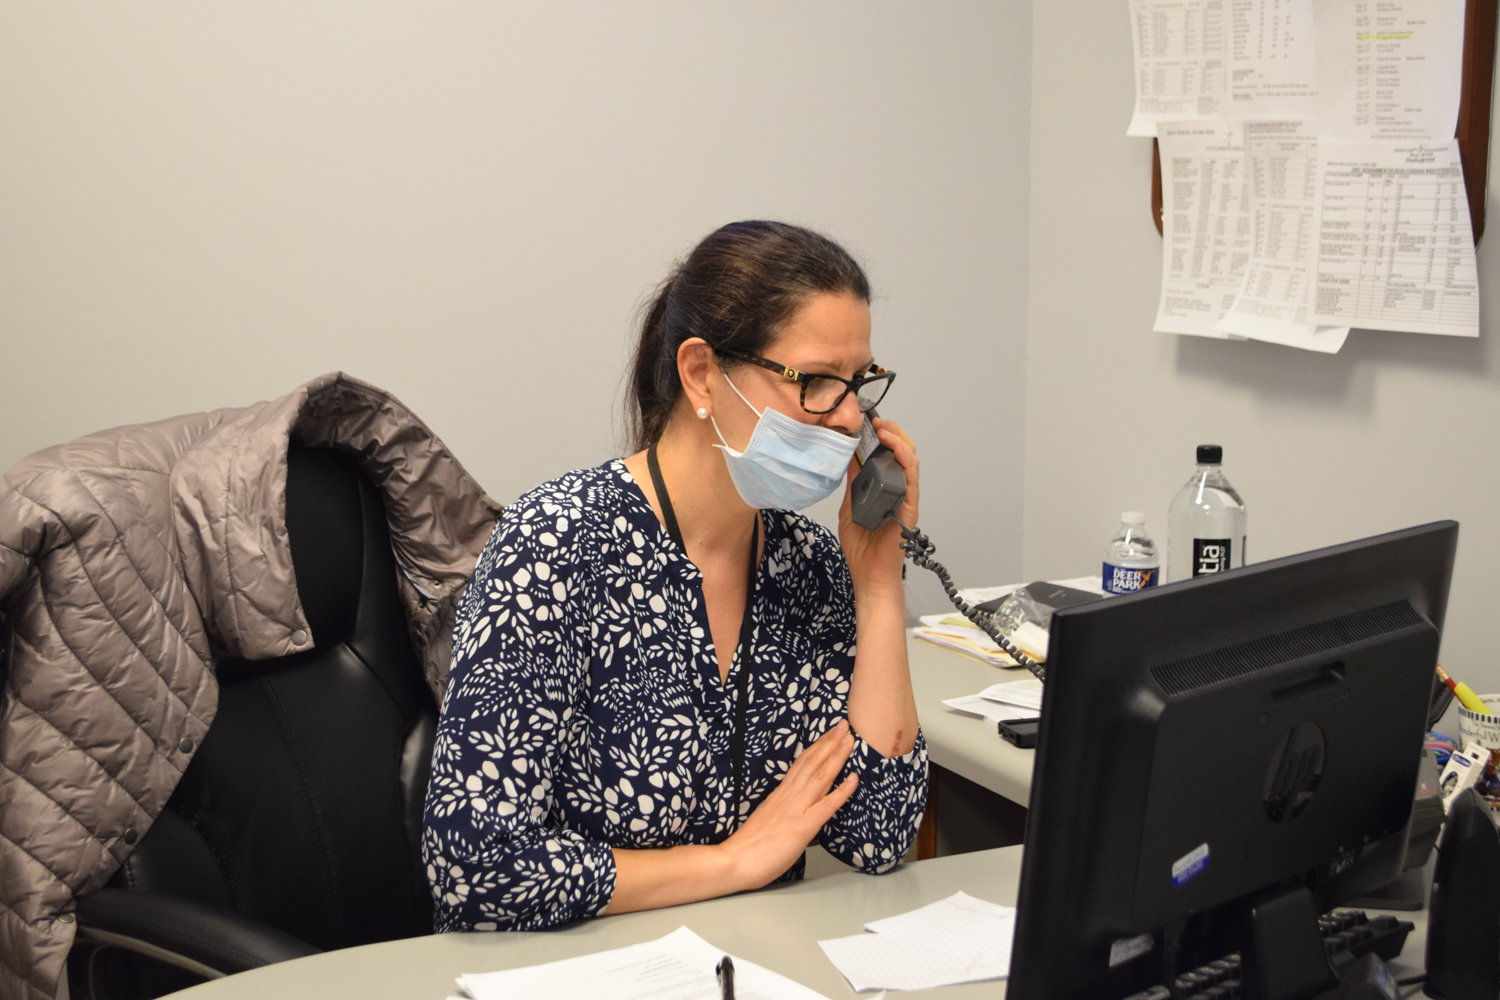 Evangeline Anastasiou, social services supervisor at the Hebrew Home at Riverdale, wears personal protective equipment at her desk. Since the advent of the coronavirus pandemic, the Hebrew Home has lost 25 residents from confirmed or suspected complications related to COVID-19.